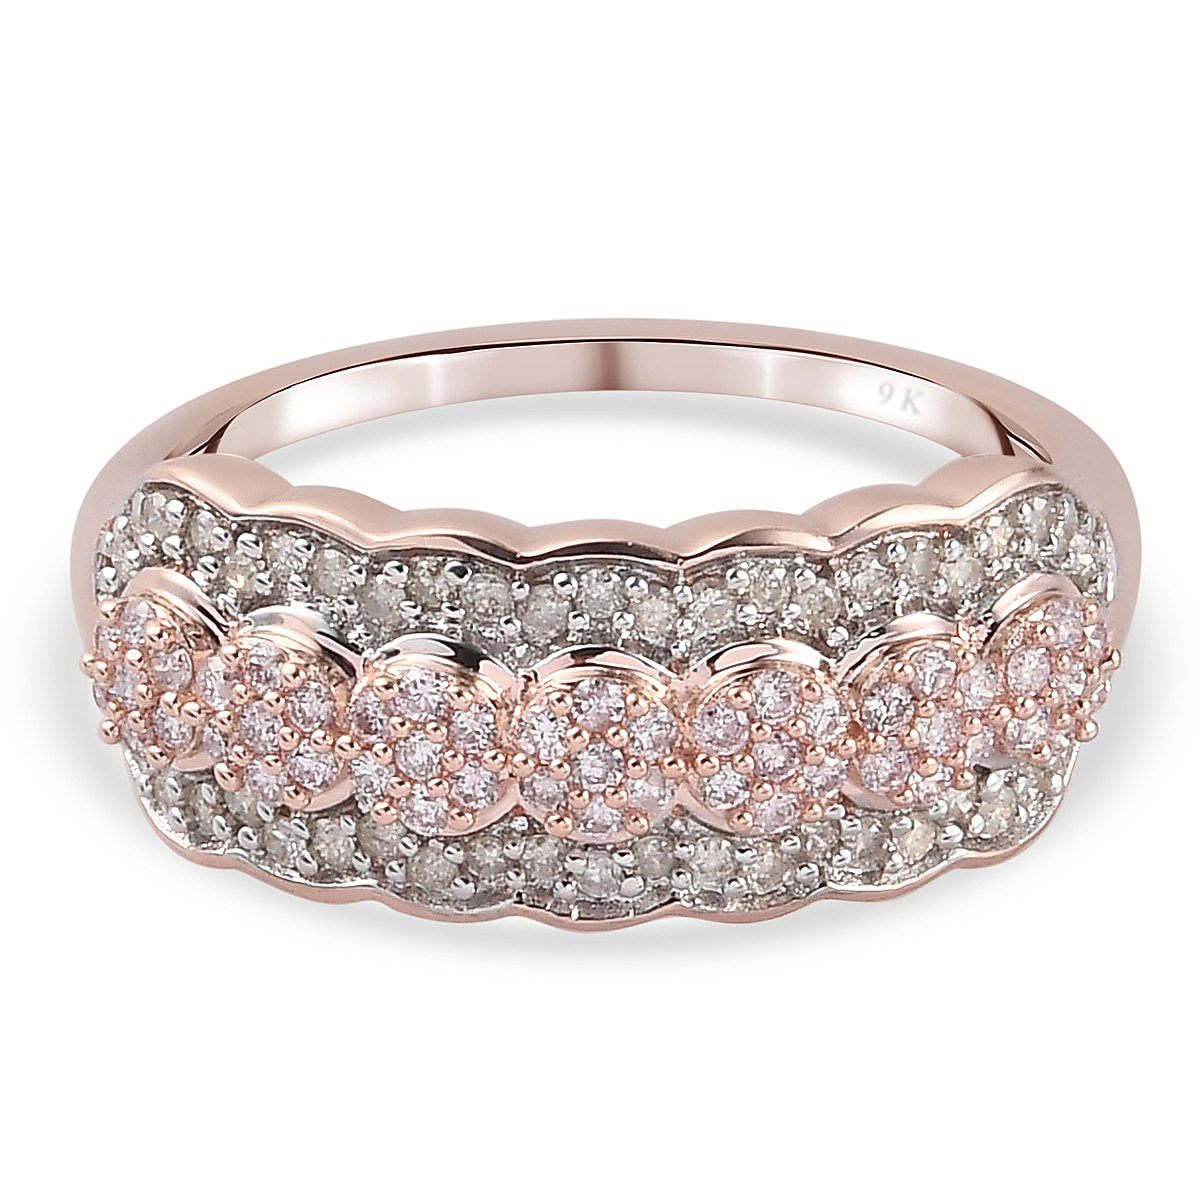 0.50 Ct. SGL Certified Natural Pink and White Diamond I3 /G-H Cluster Ring in 9K Rose Gold